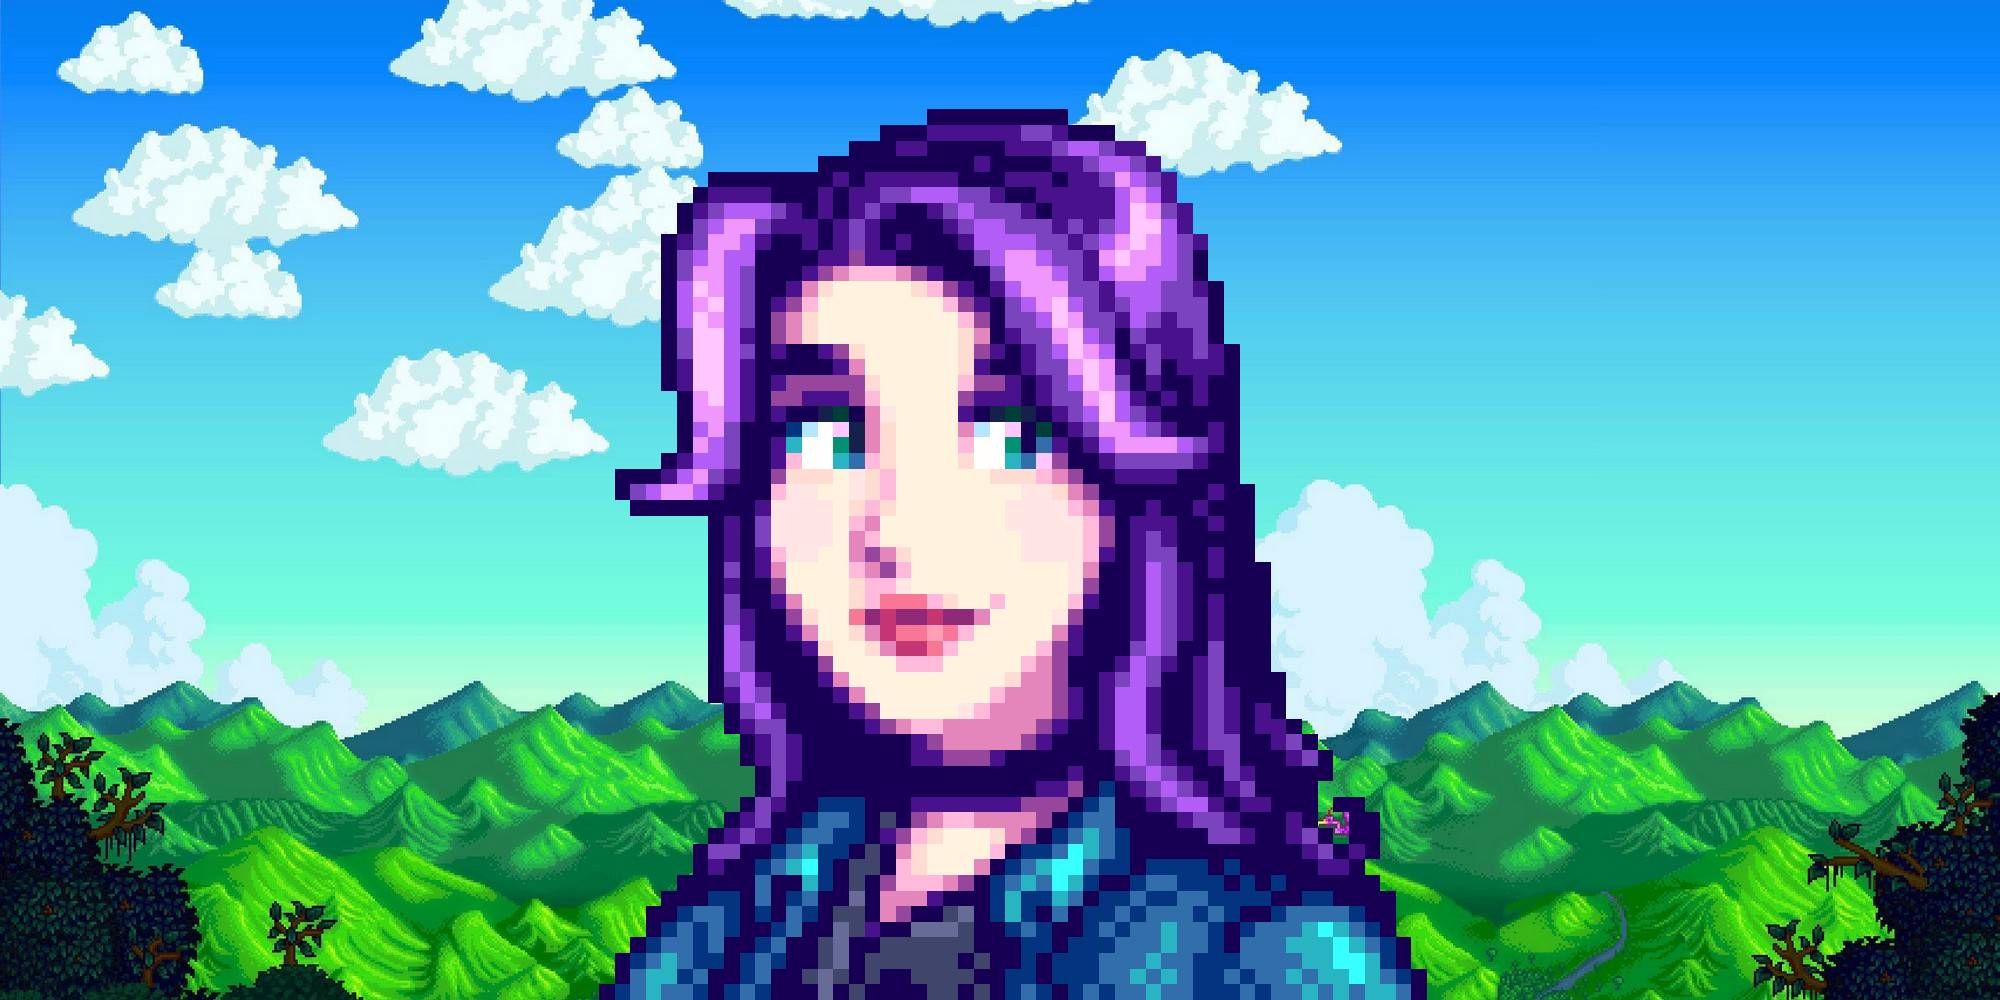 abigail on the stardew valley title background marriage